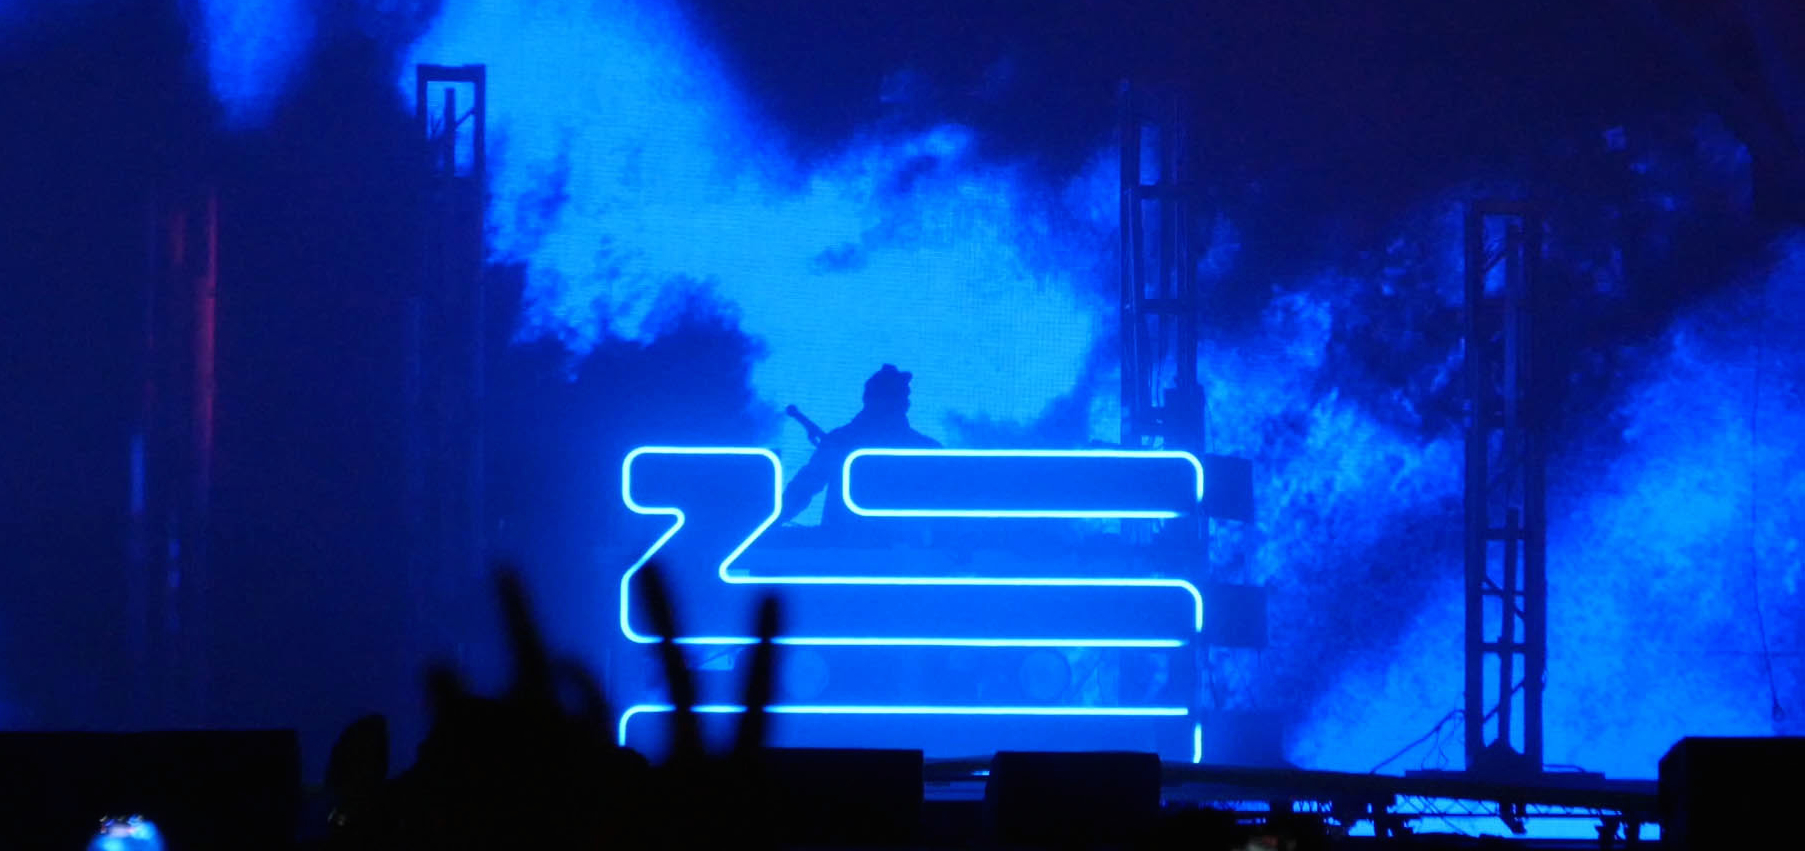 Zhu Releases New Song + Video "In The Morning"